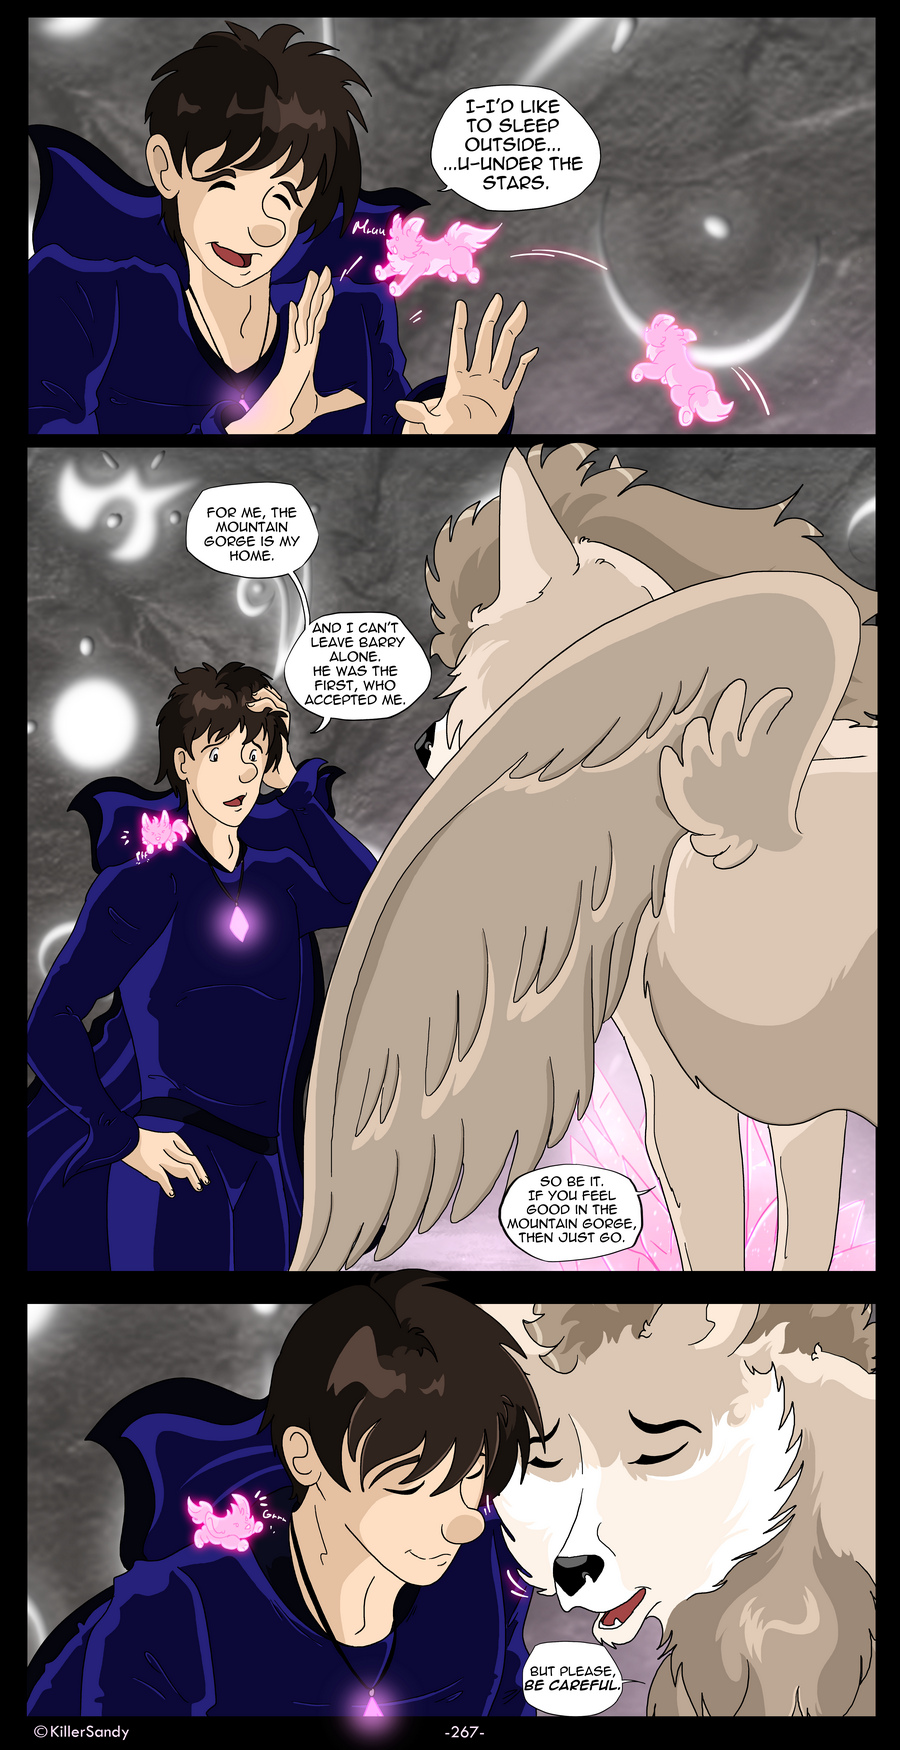 The Prince of the Moonlight Stone page 267